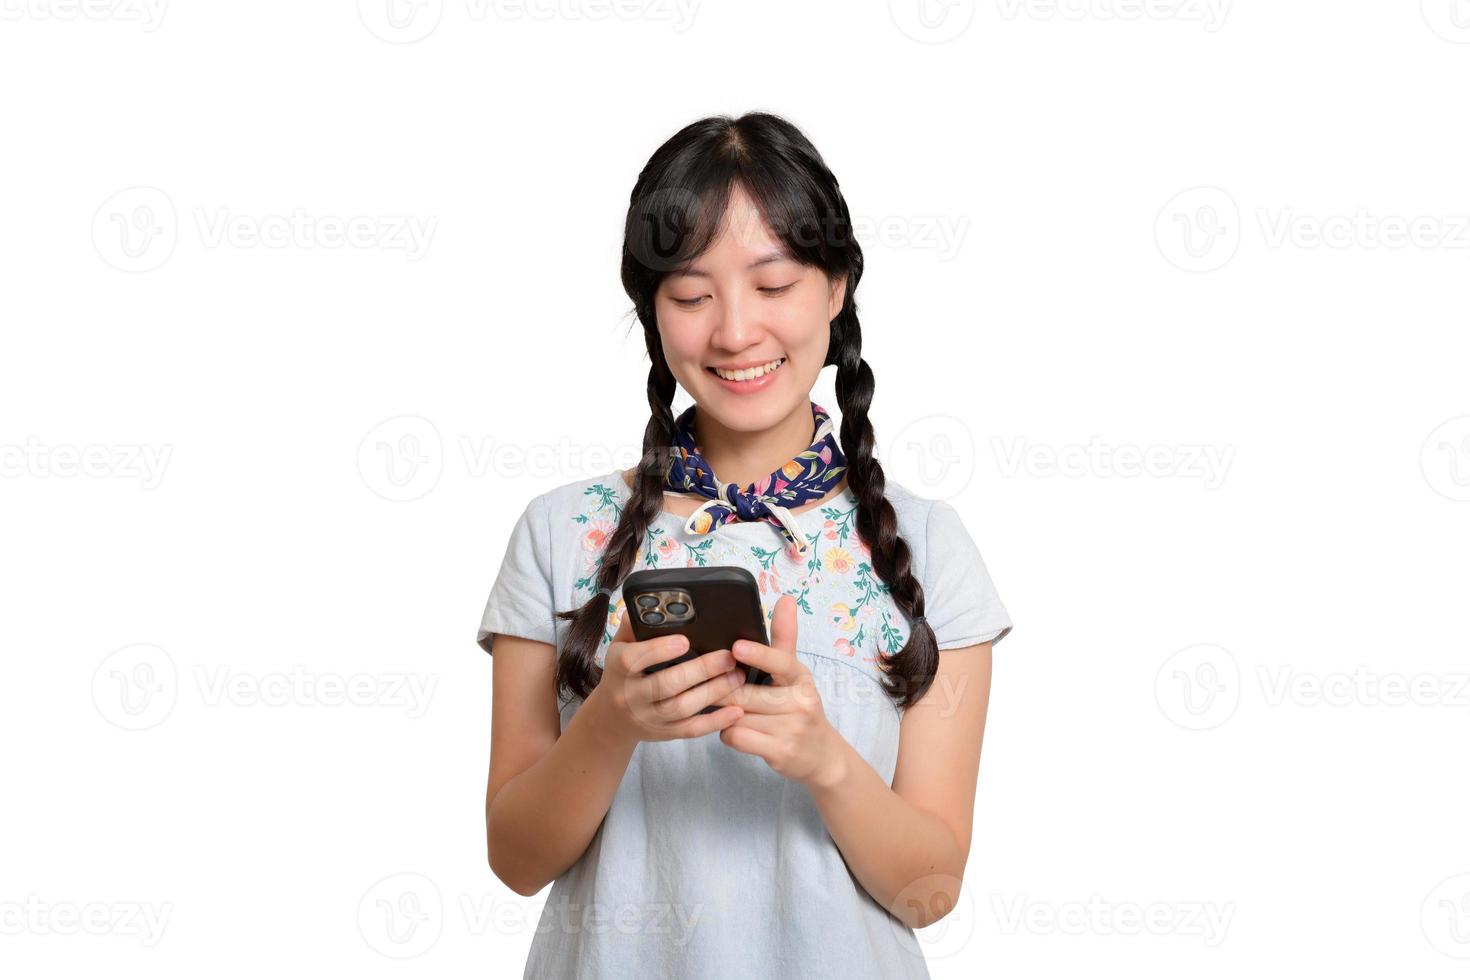 Portrait of happy beautiful young asian woman in denim dress using a smartphone on white background. studio shot photo